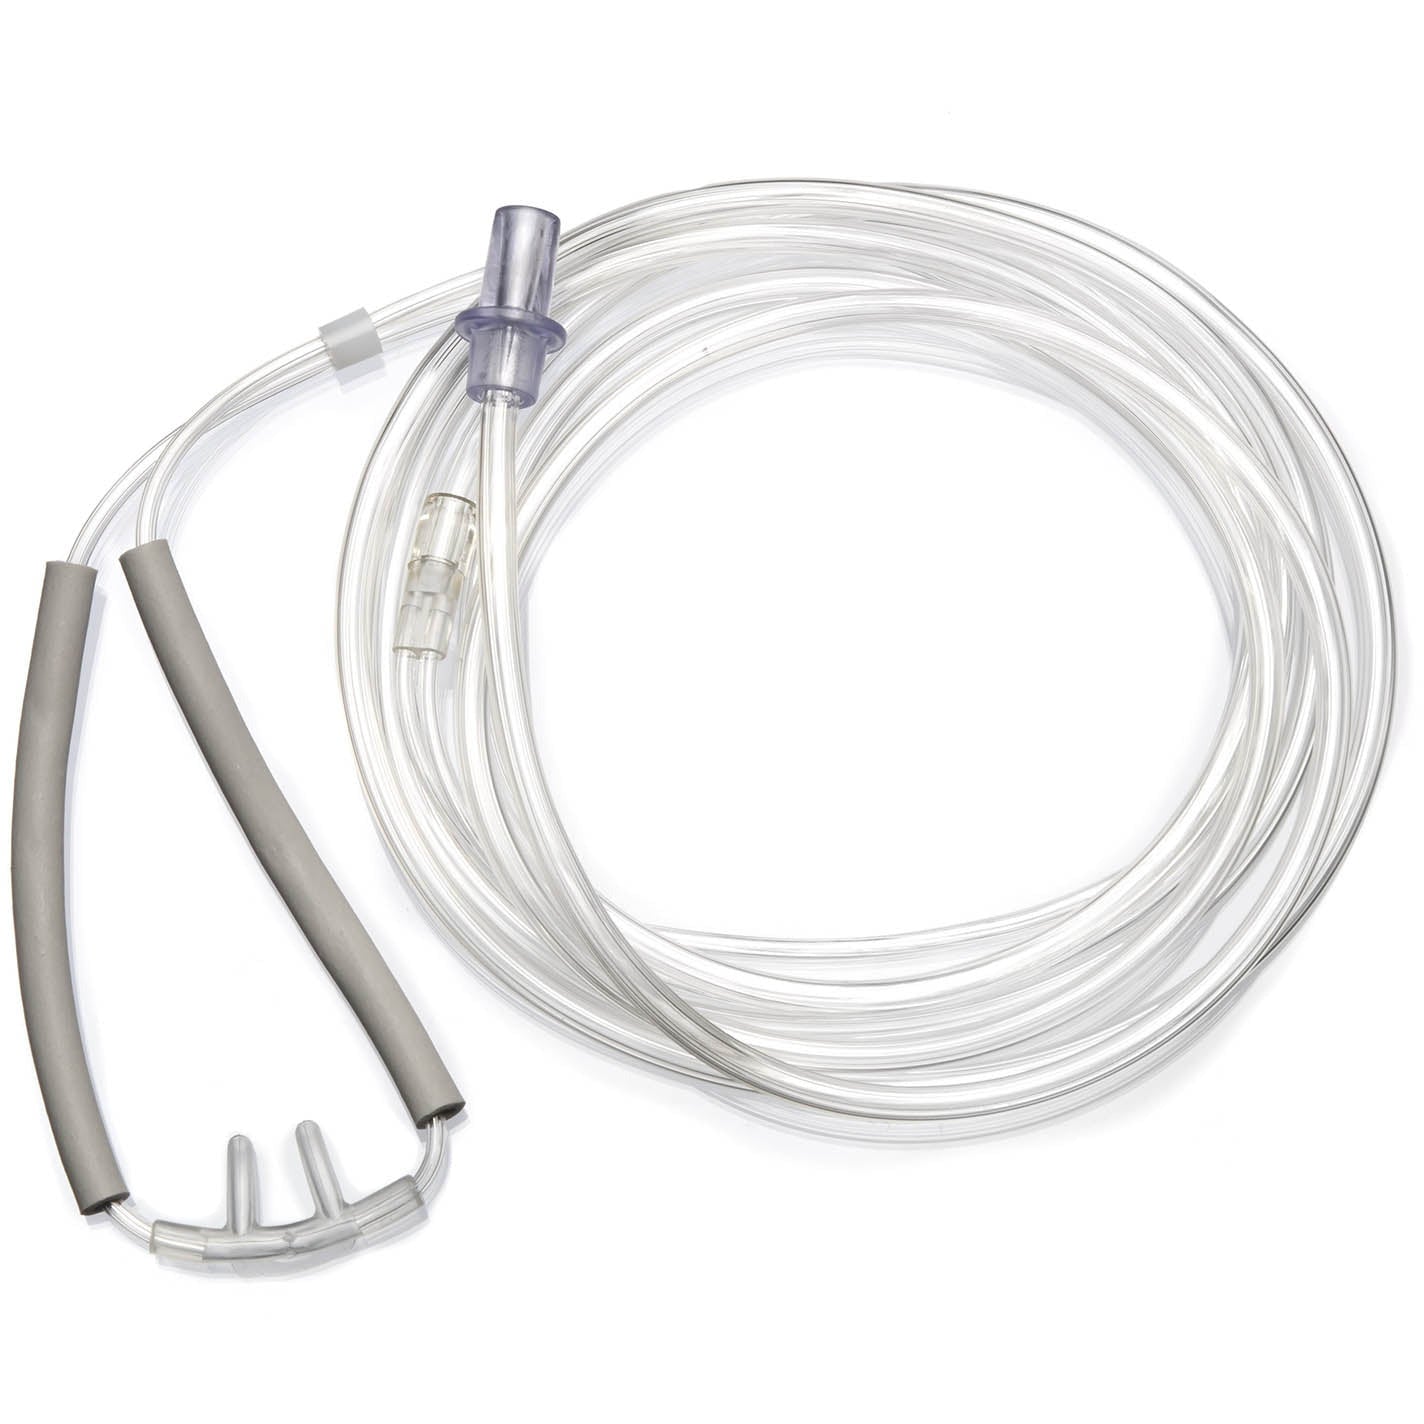 Adult nasal cannula curved prongs 1.8m - Single